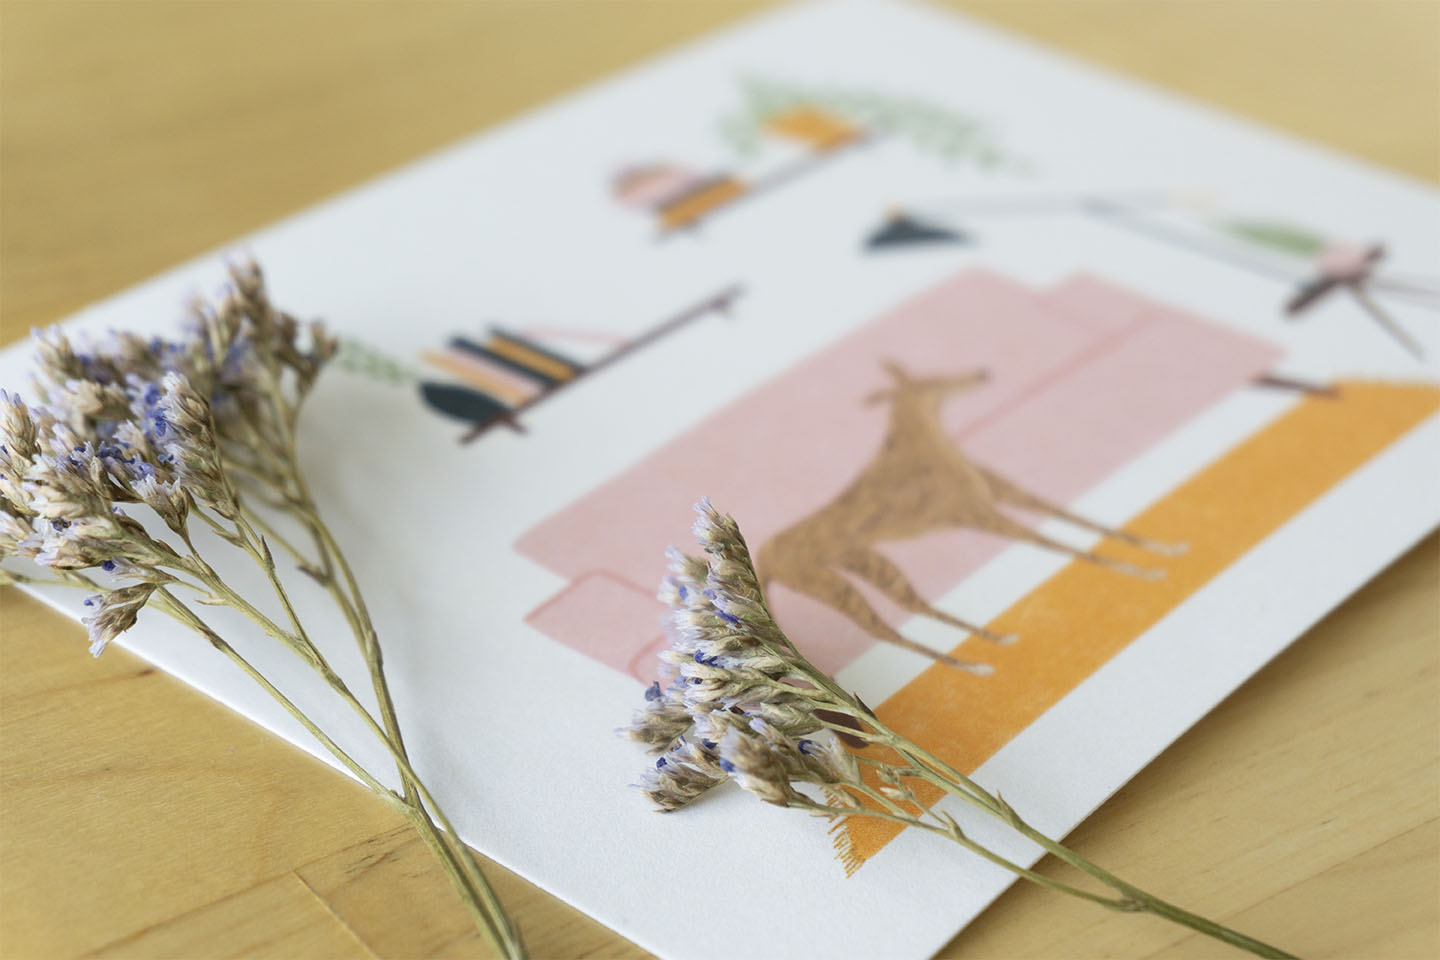 Two flowers rest on An art print of a greyhound napping in a living room